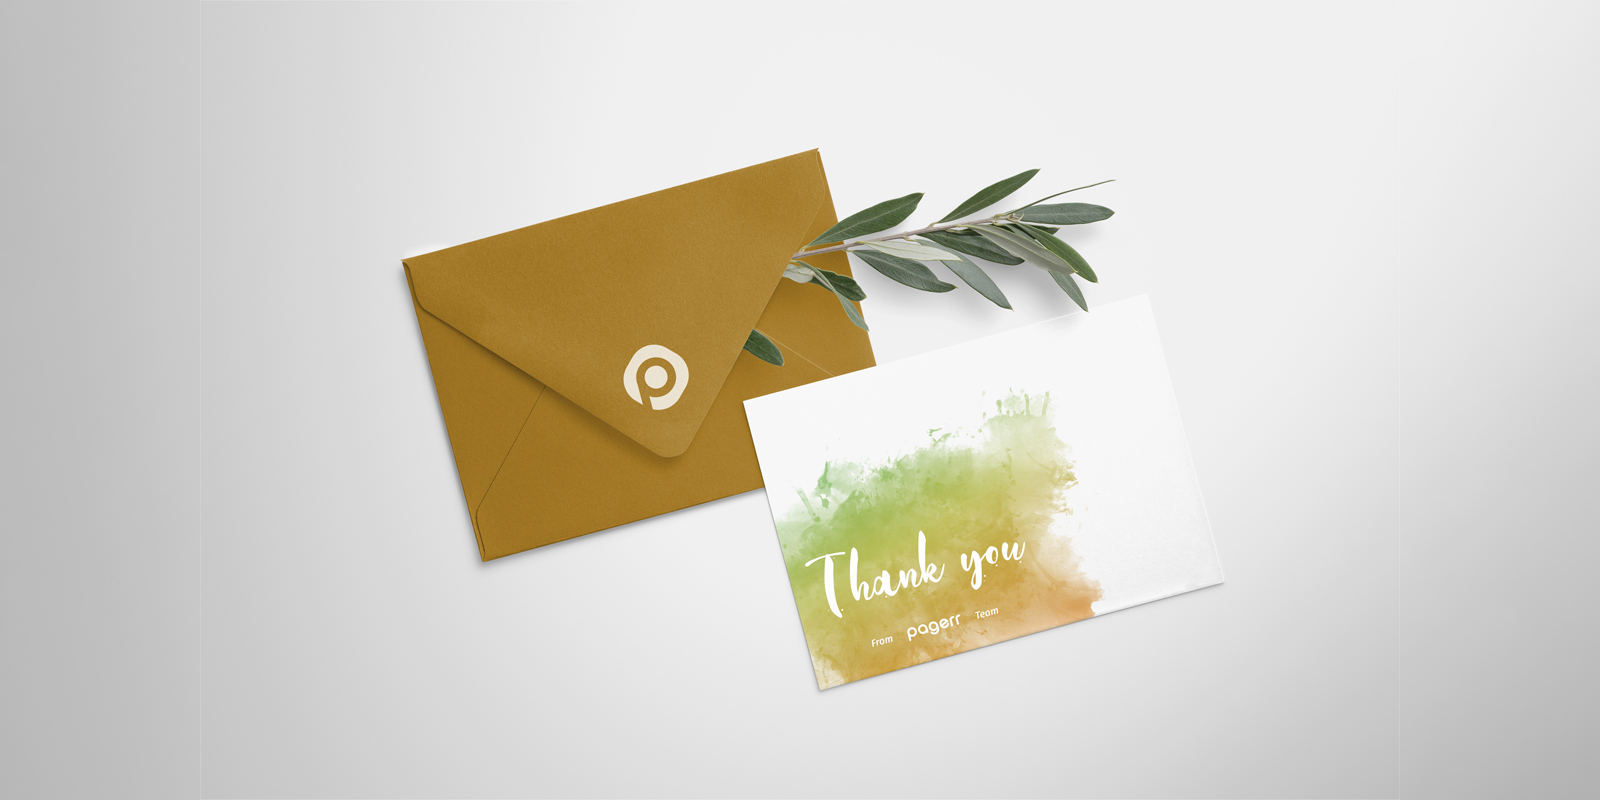 Thank you cards in Paris - Print with Pagerr